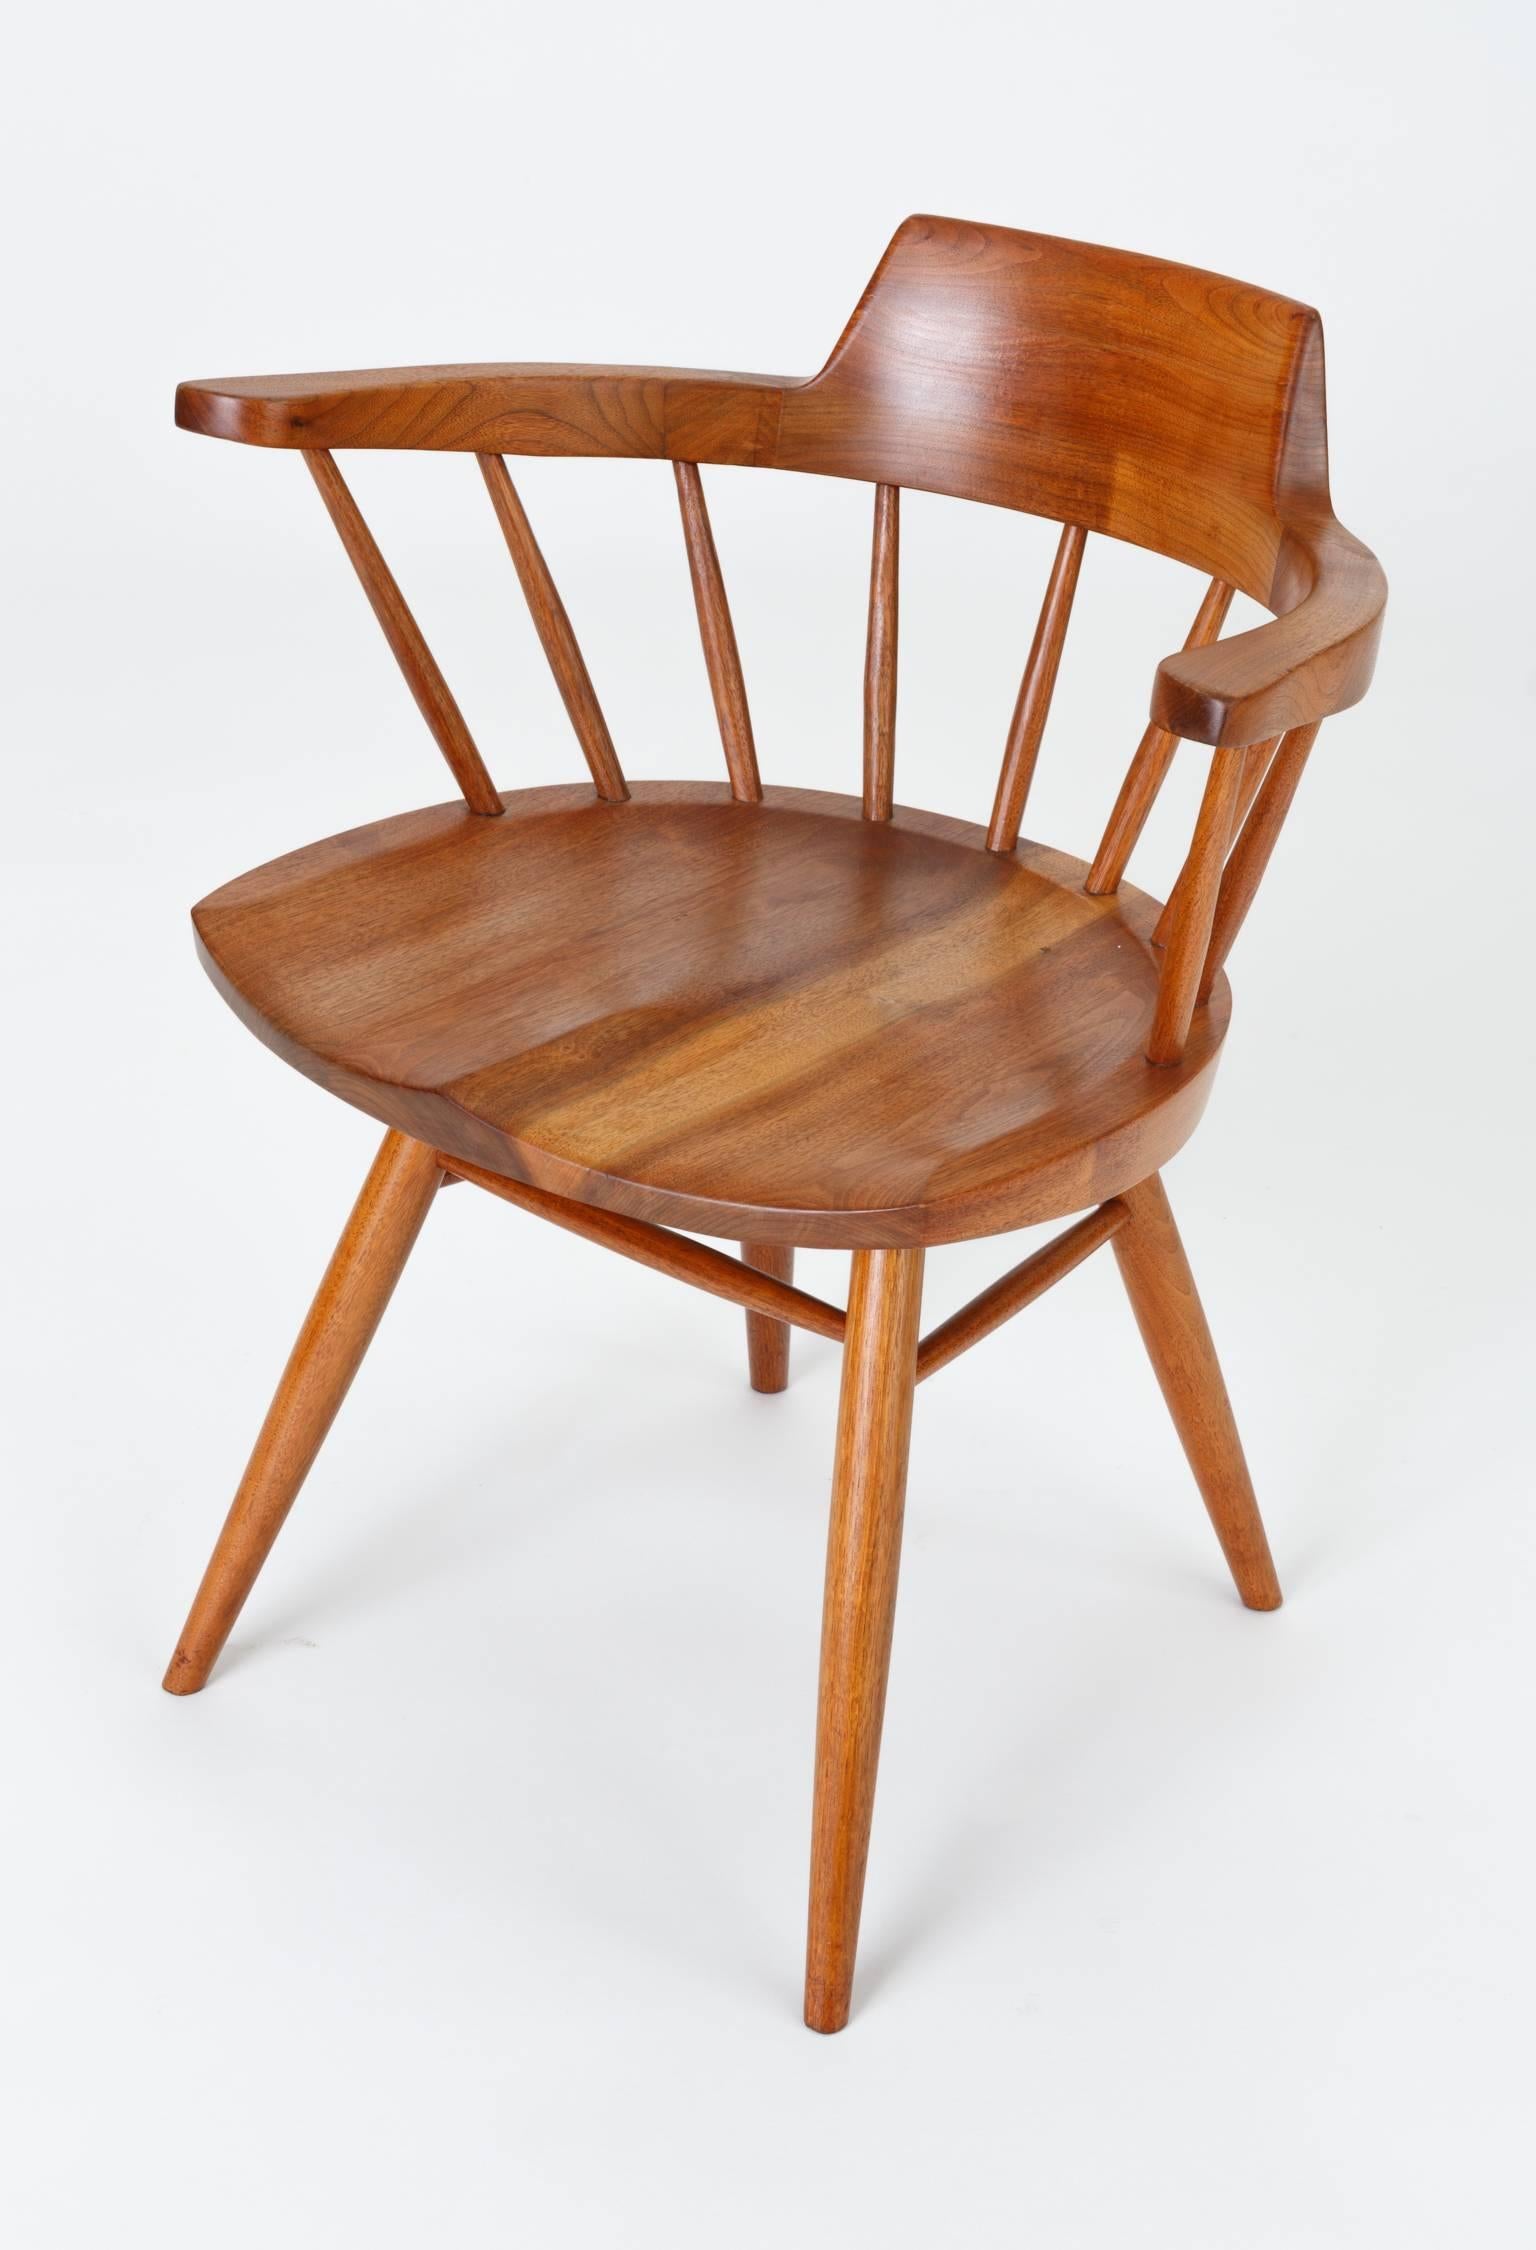 Mid-20th Century Set of Four Black Walnut Captain's Chairs by George Nakashima Studio